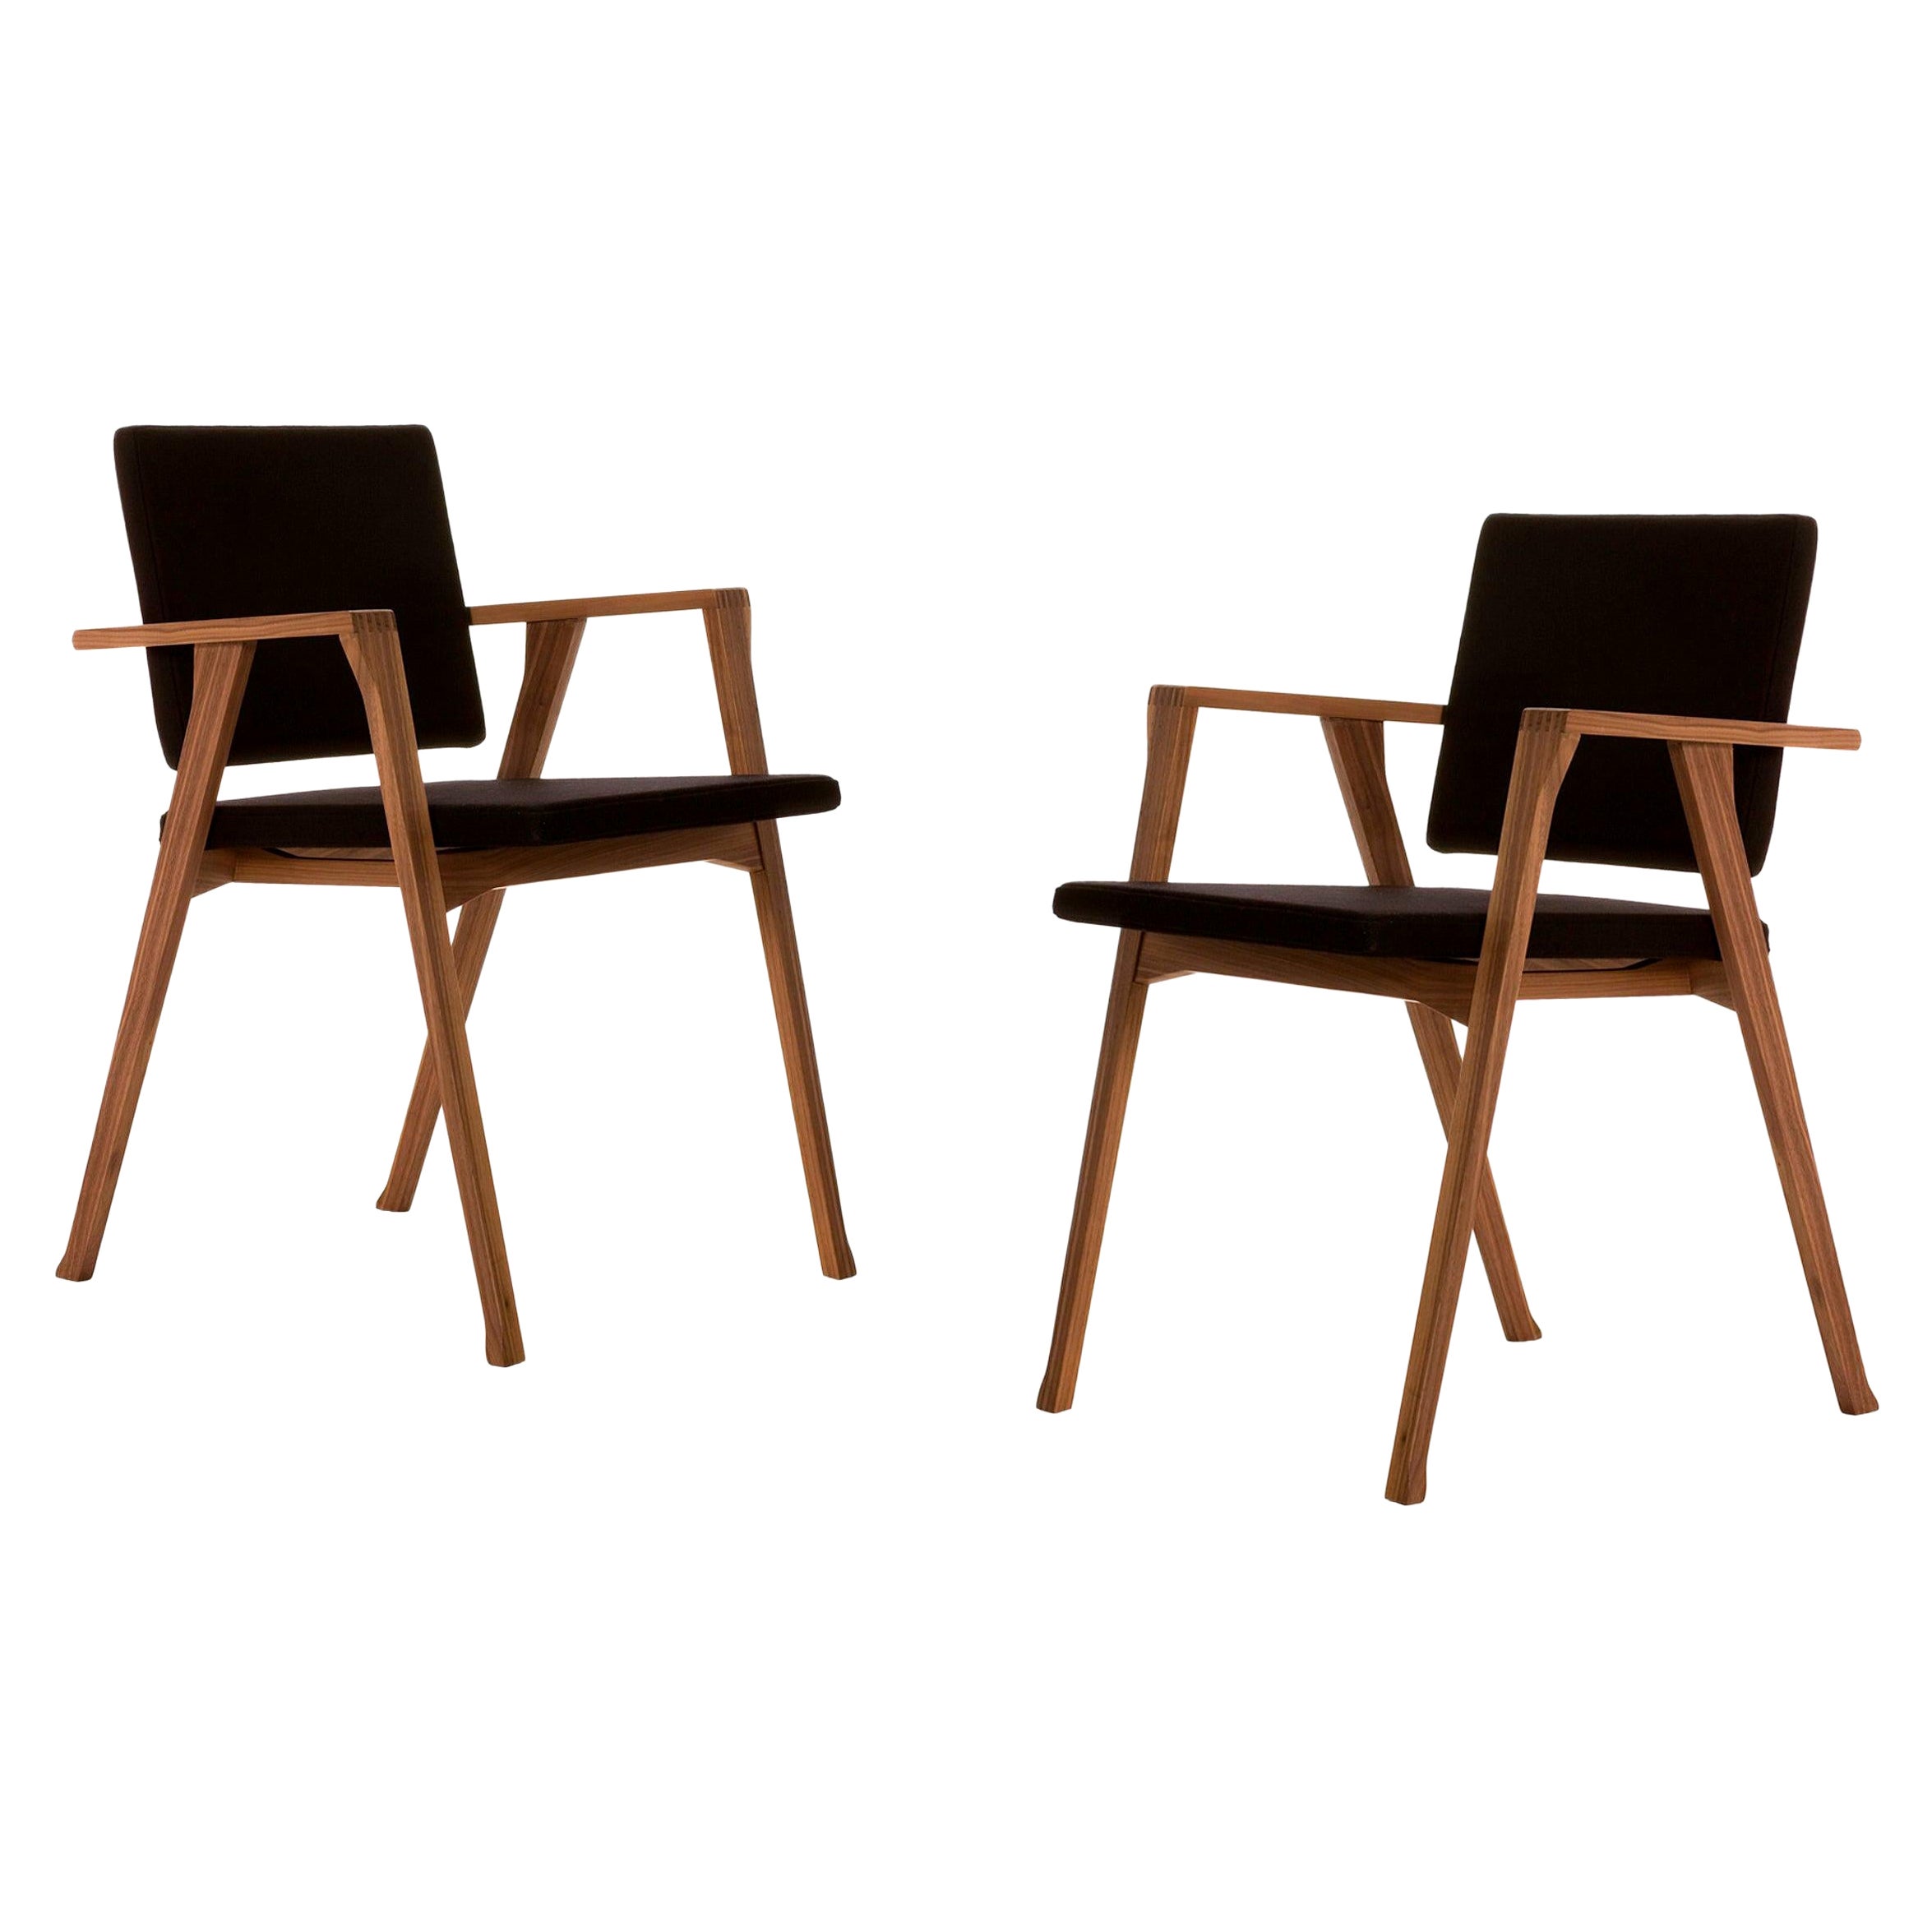 Set of Two Franco Albini Luisa Chairs, Wood and Fabric by Cassina